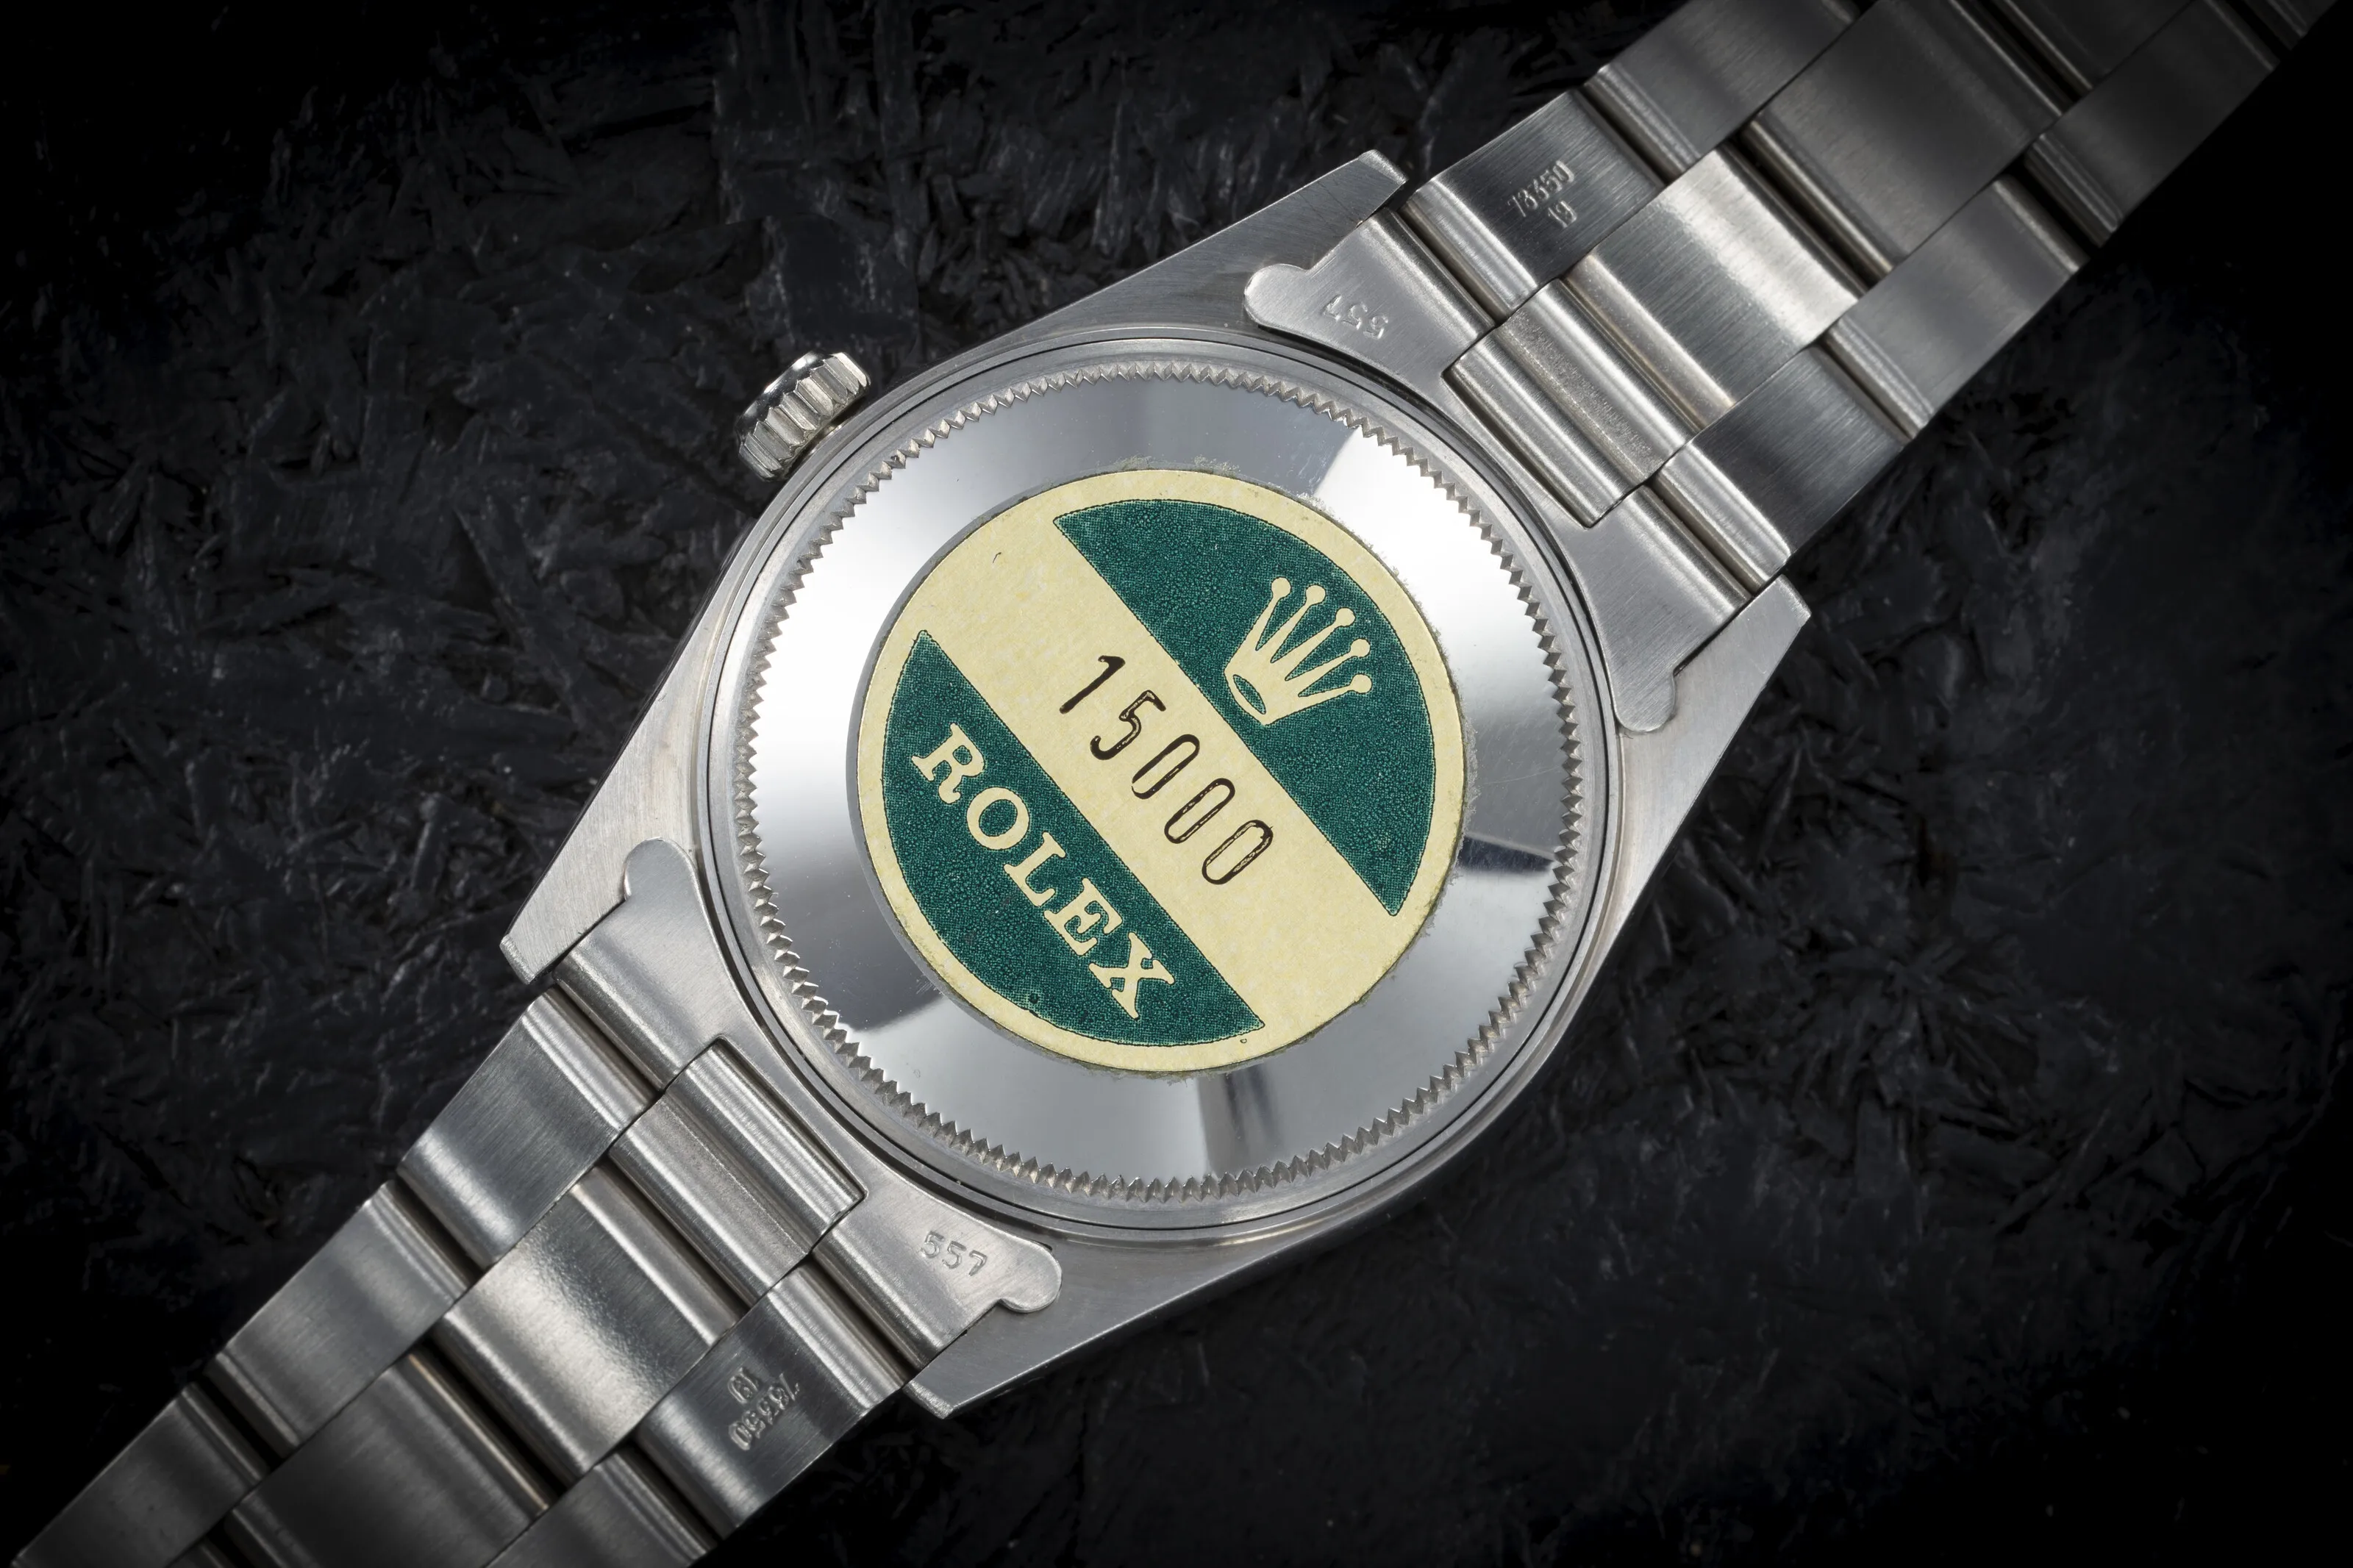 Rolex Oyster Perpetual Date 1500 34mm Stainless steel Silver 1